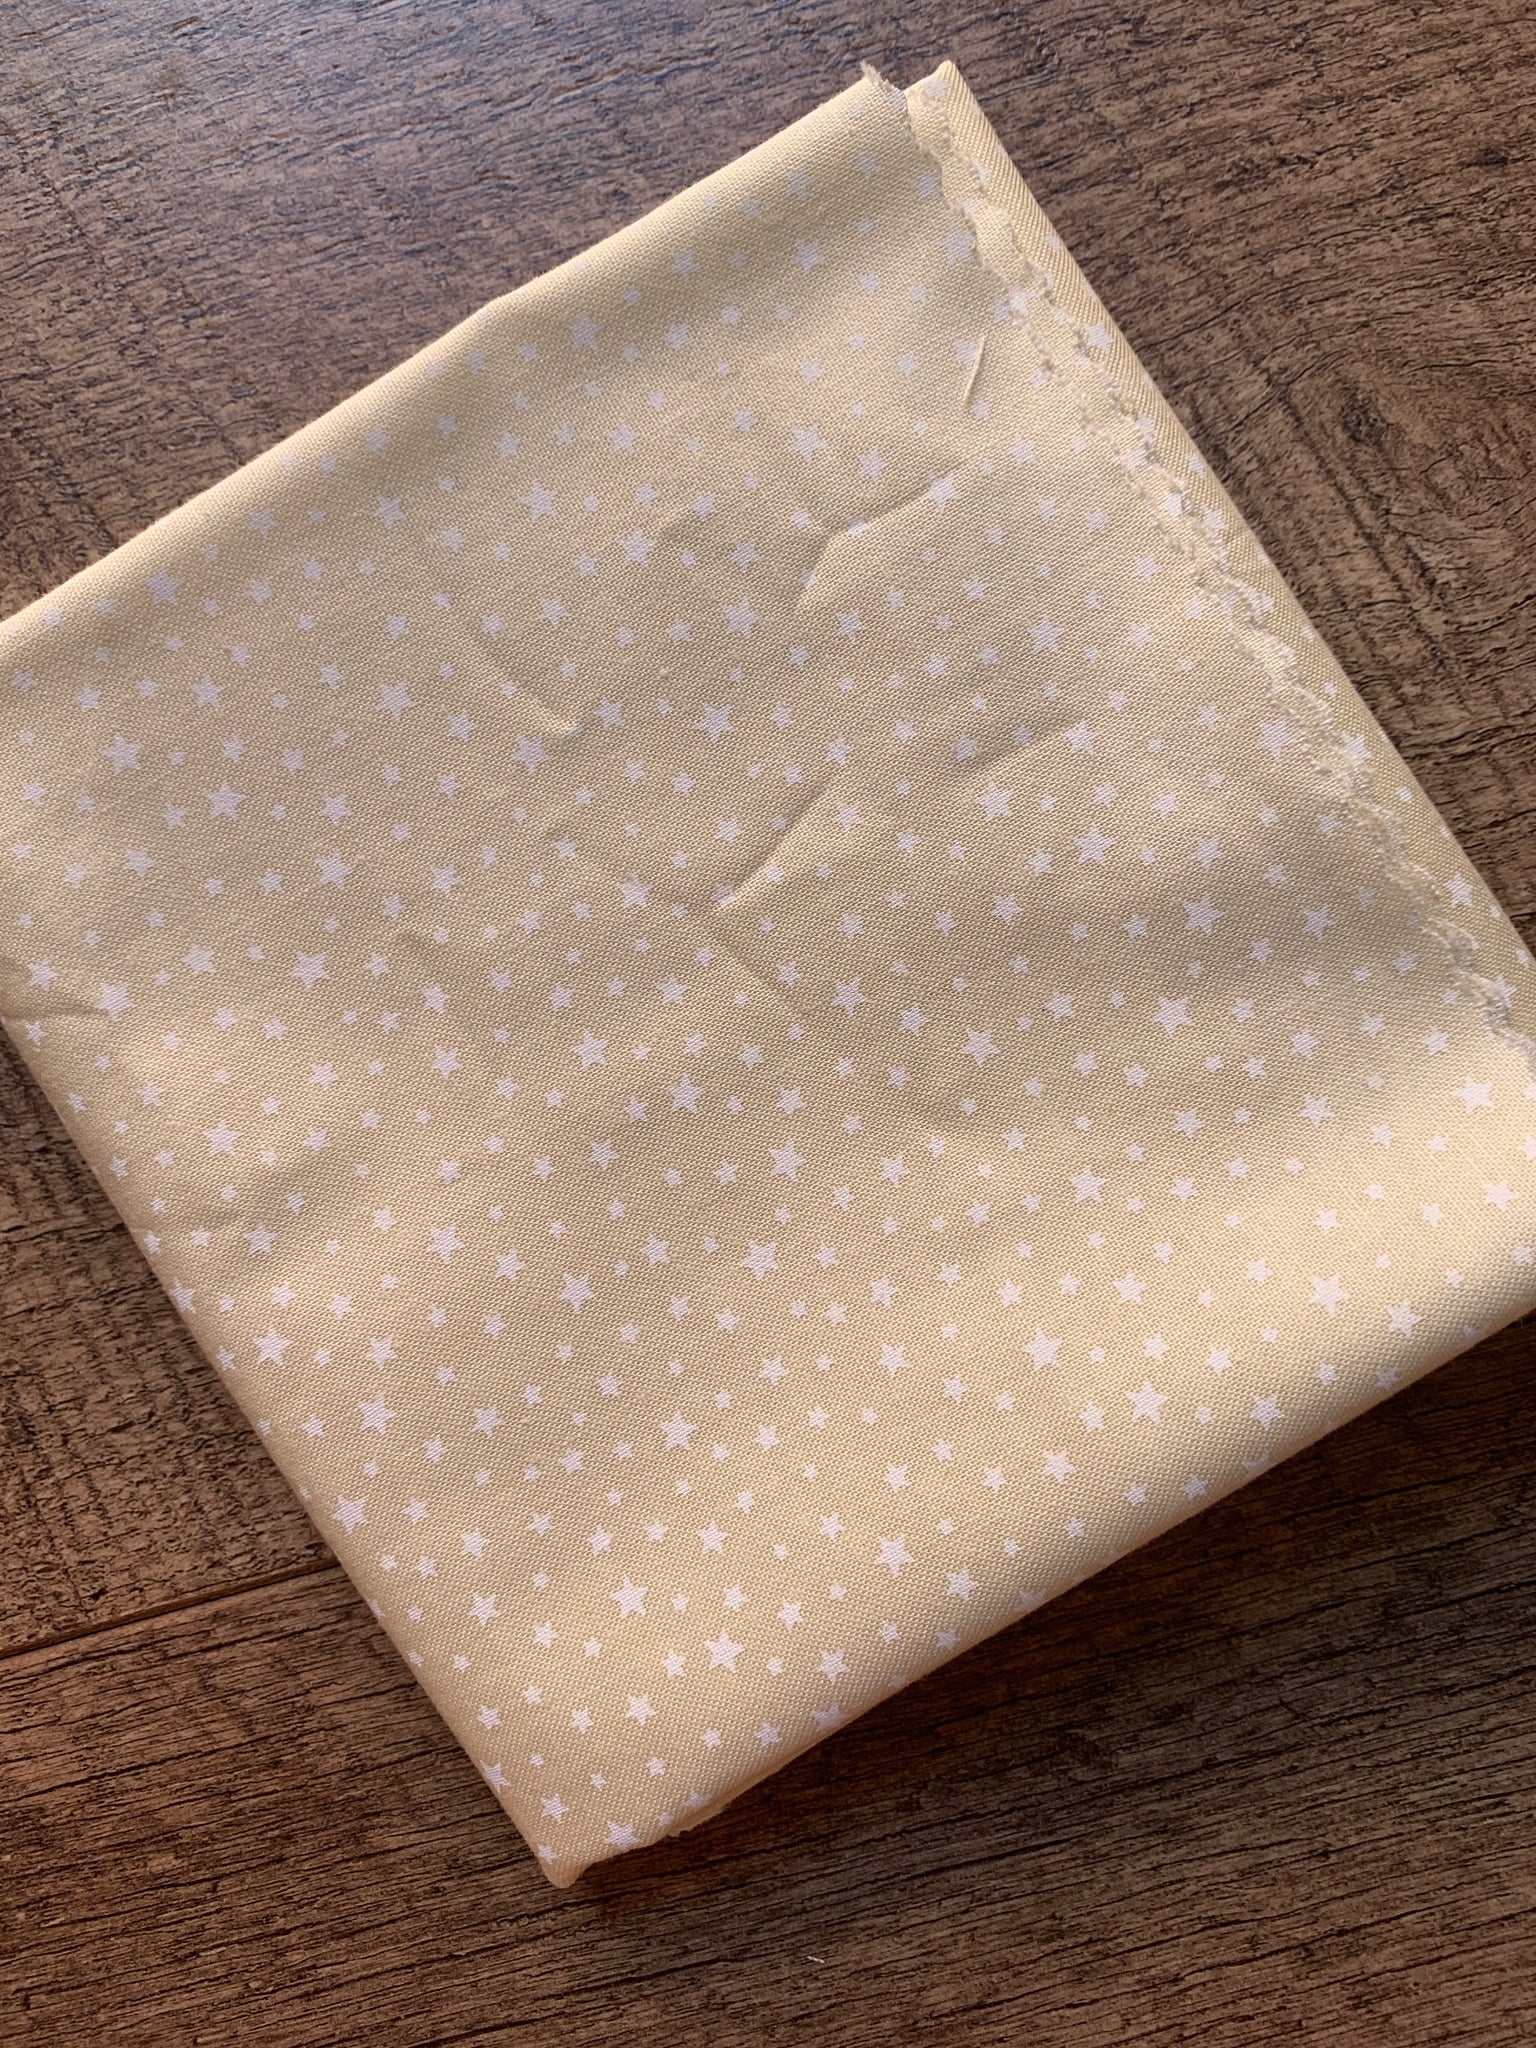 Sale Fabric 155 :  Cream with white stars Remnant 17" x 45"